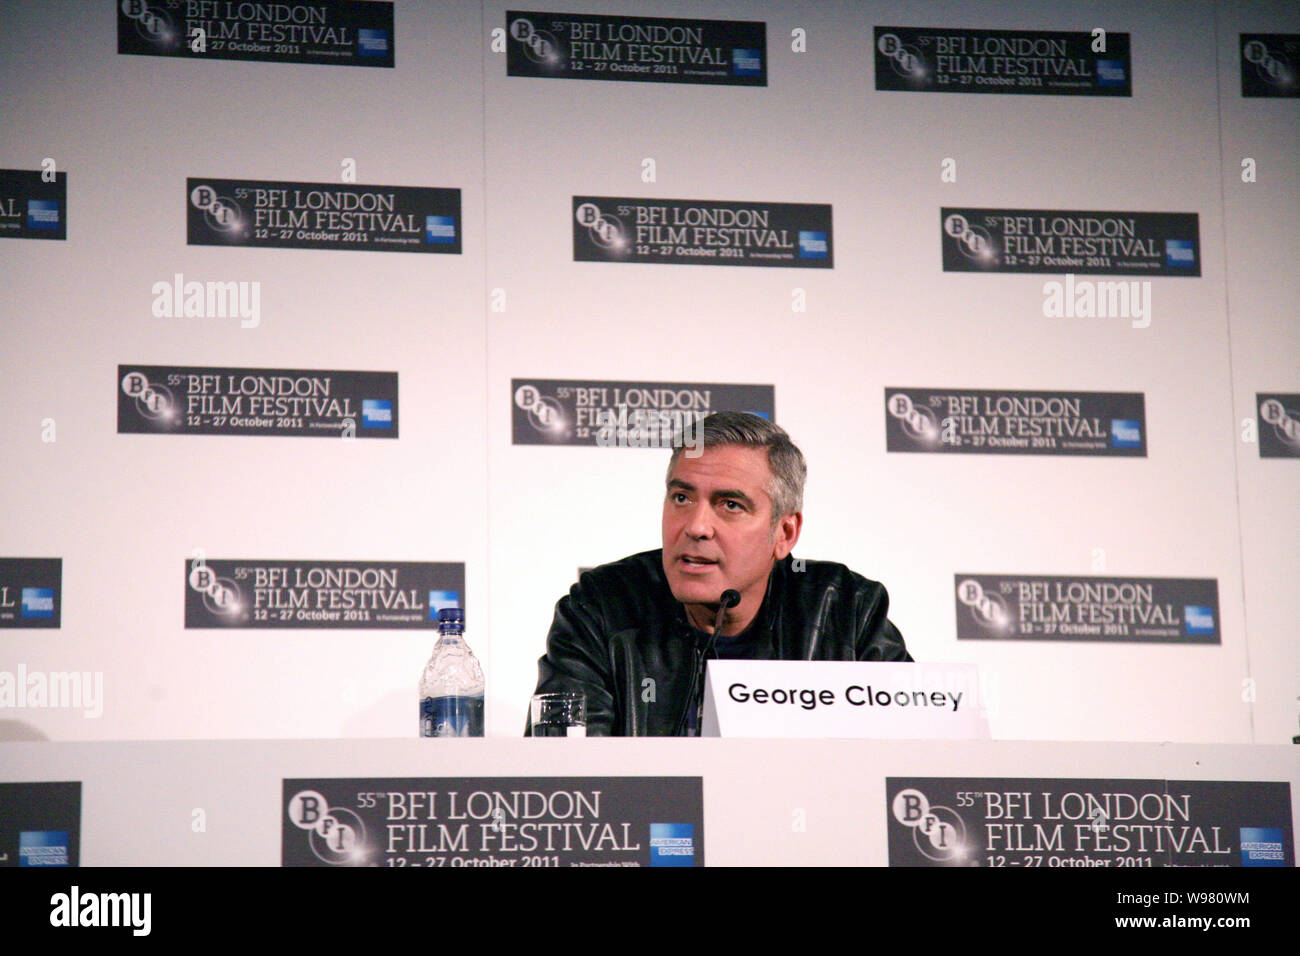 US actor George Clooney speaks at a press conference for the movie, The Ides of March, during the 55th BFI London Film Festival in London, UK, 19 Octo Stock Photo